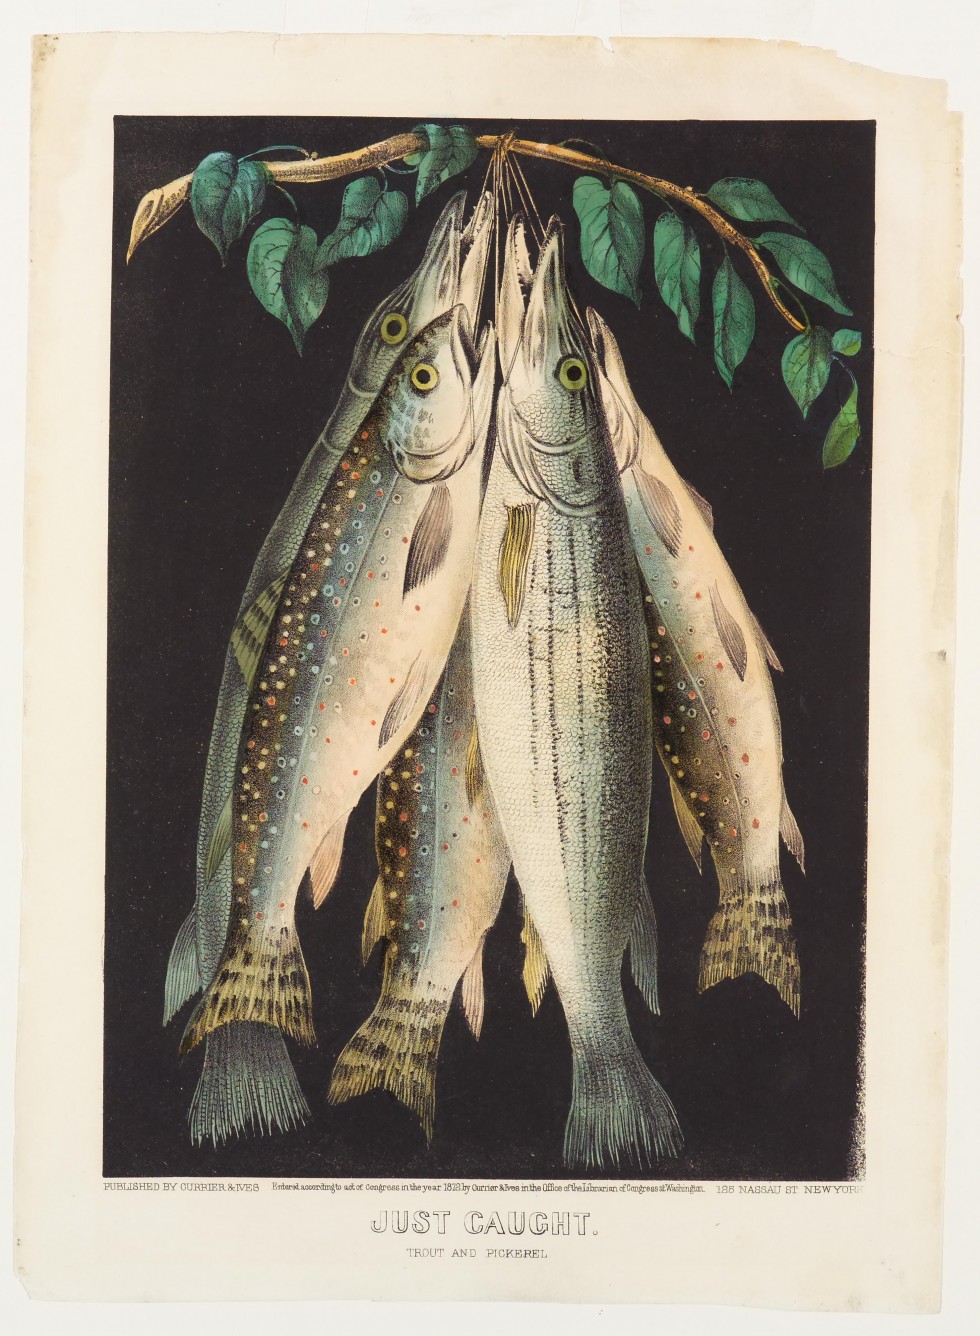 Black background; five fish tied through mouths and hanging from branch